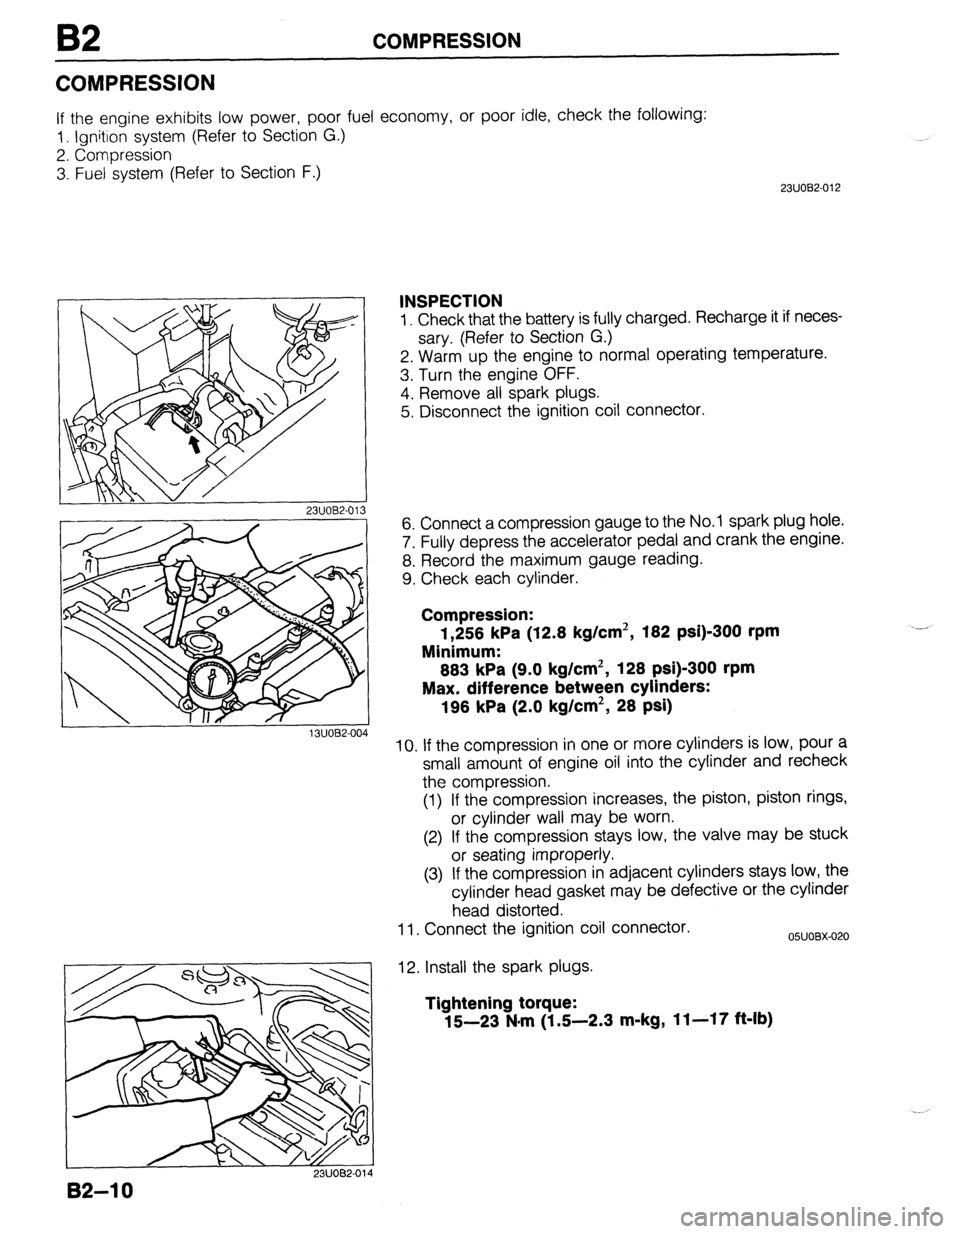 MAZDA 323 1989  Factory Repair Manual B2 COMPRESSION 
COMPRESSION 
If the engine exhibits low power, poor fuel economy, or poor idle, check the following: 
1, Ignition system (Refer to Section G.) 
2. Compression 
3. Fuel system (Refer to